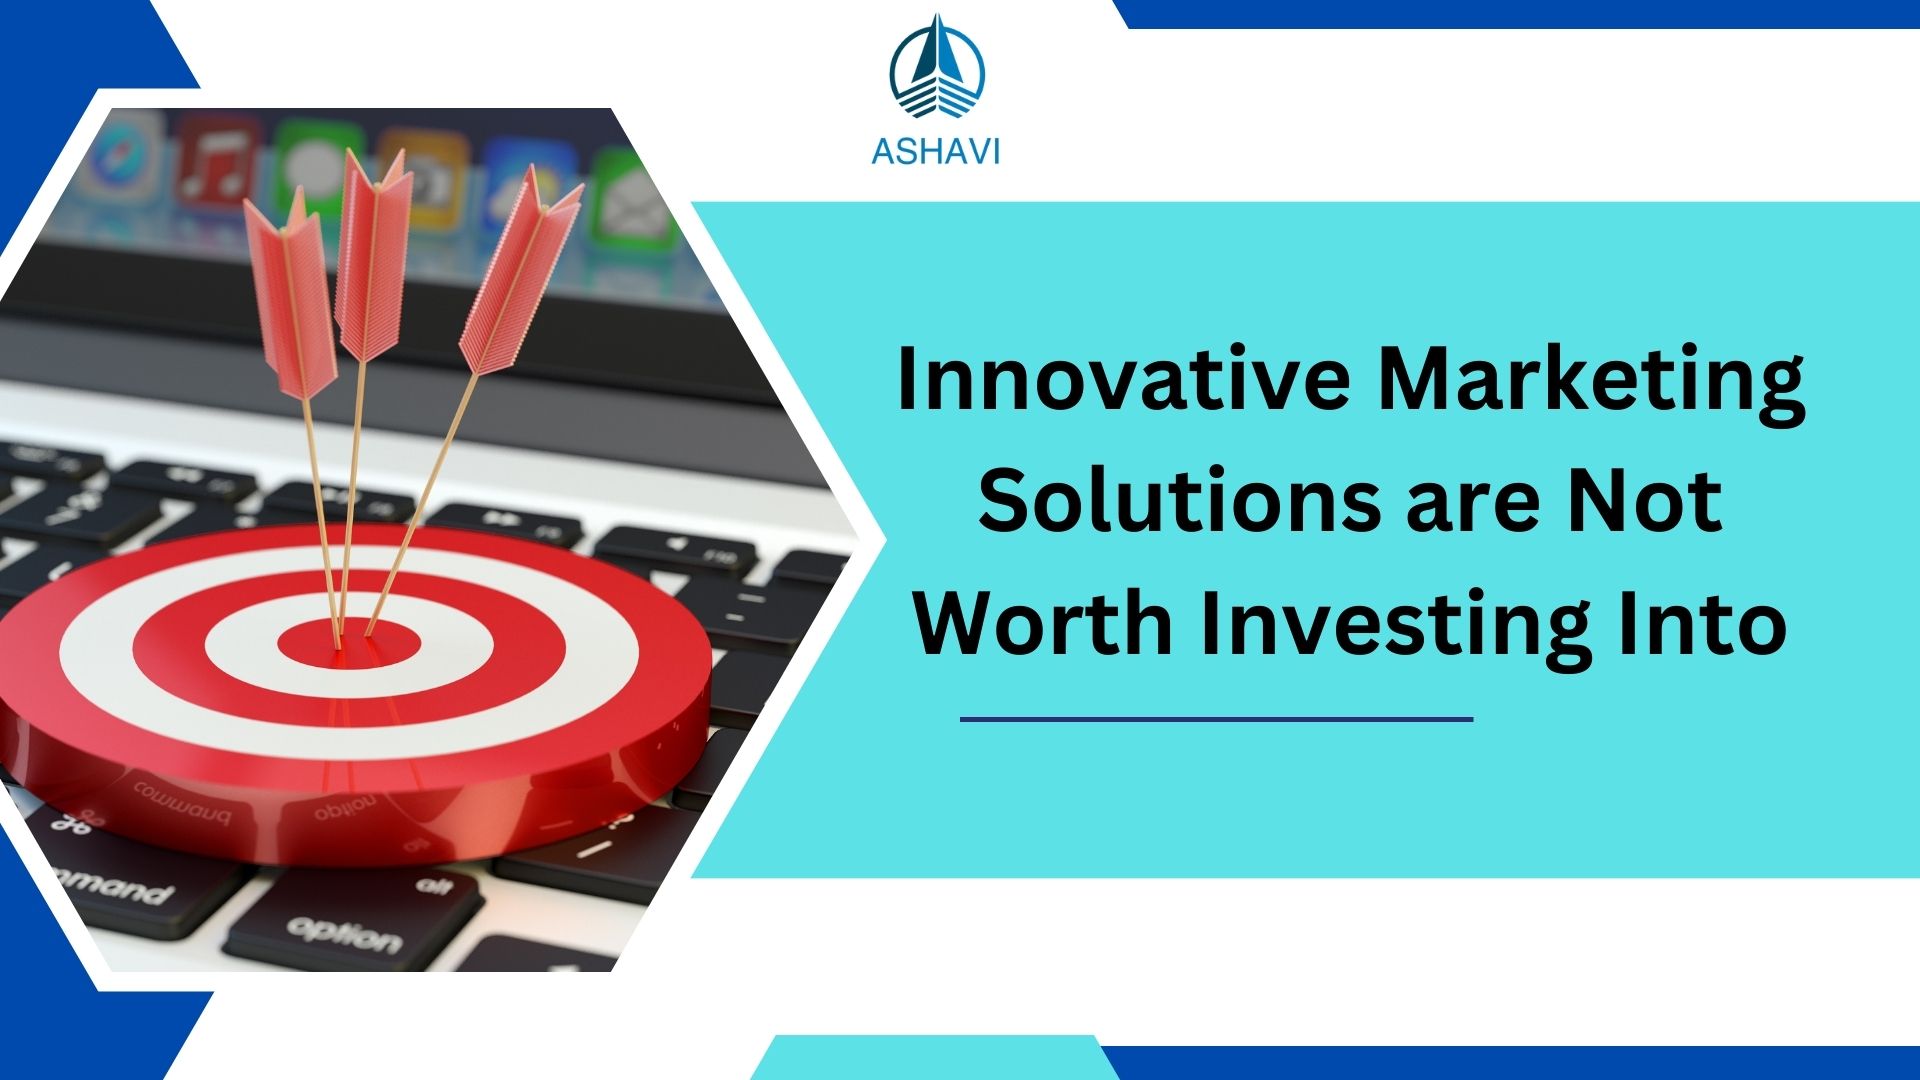 Innovative Marketing Solutions are Not Worth Investing Into